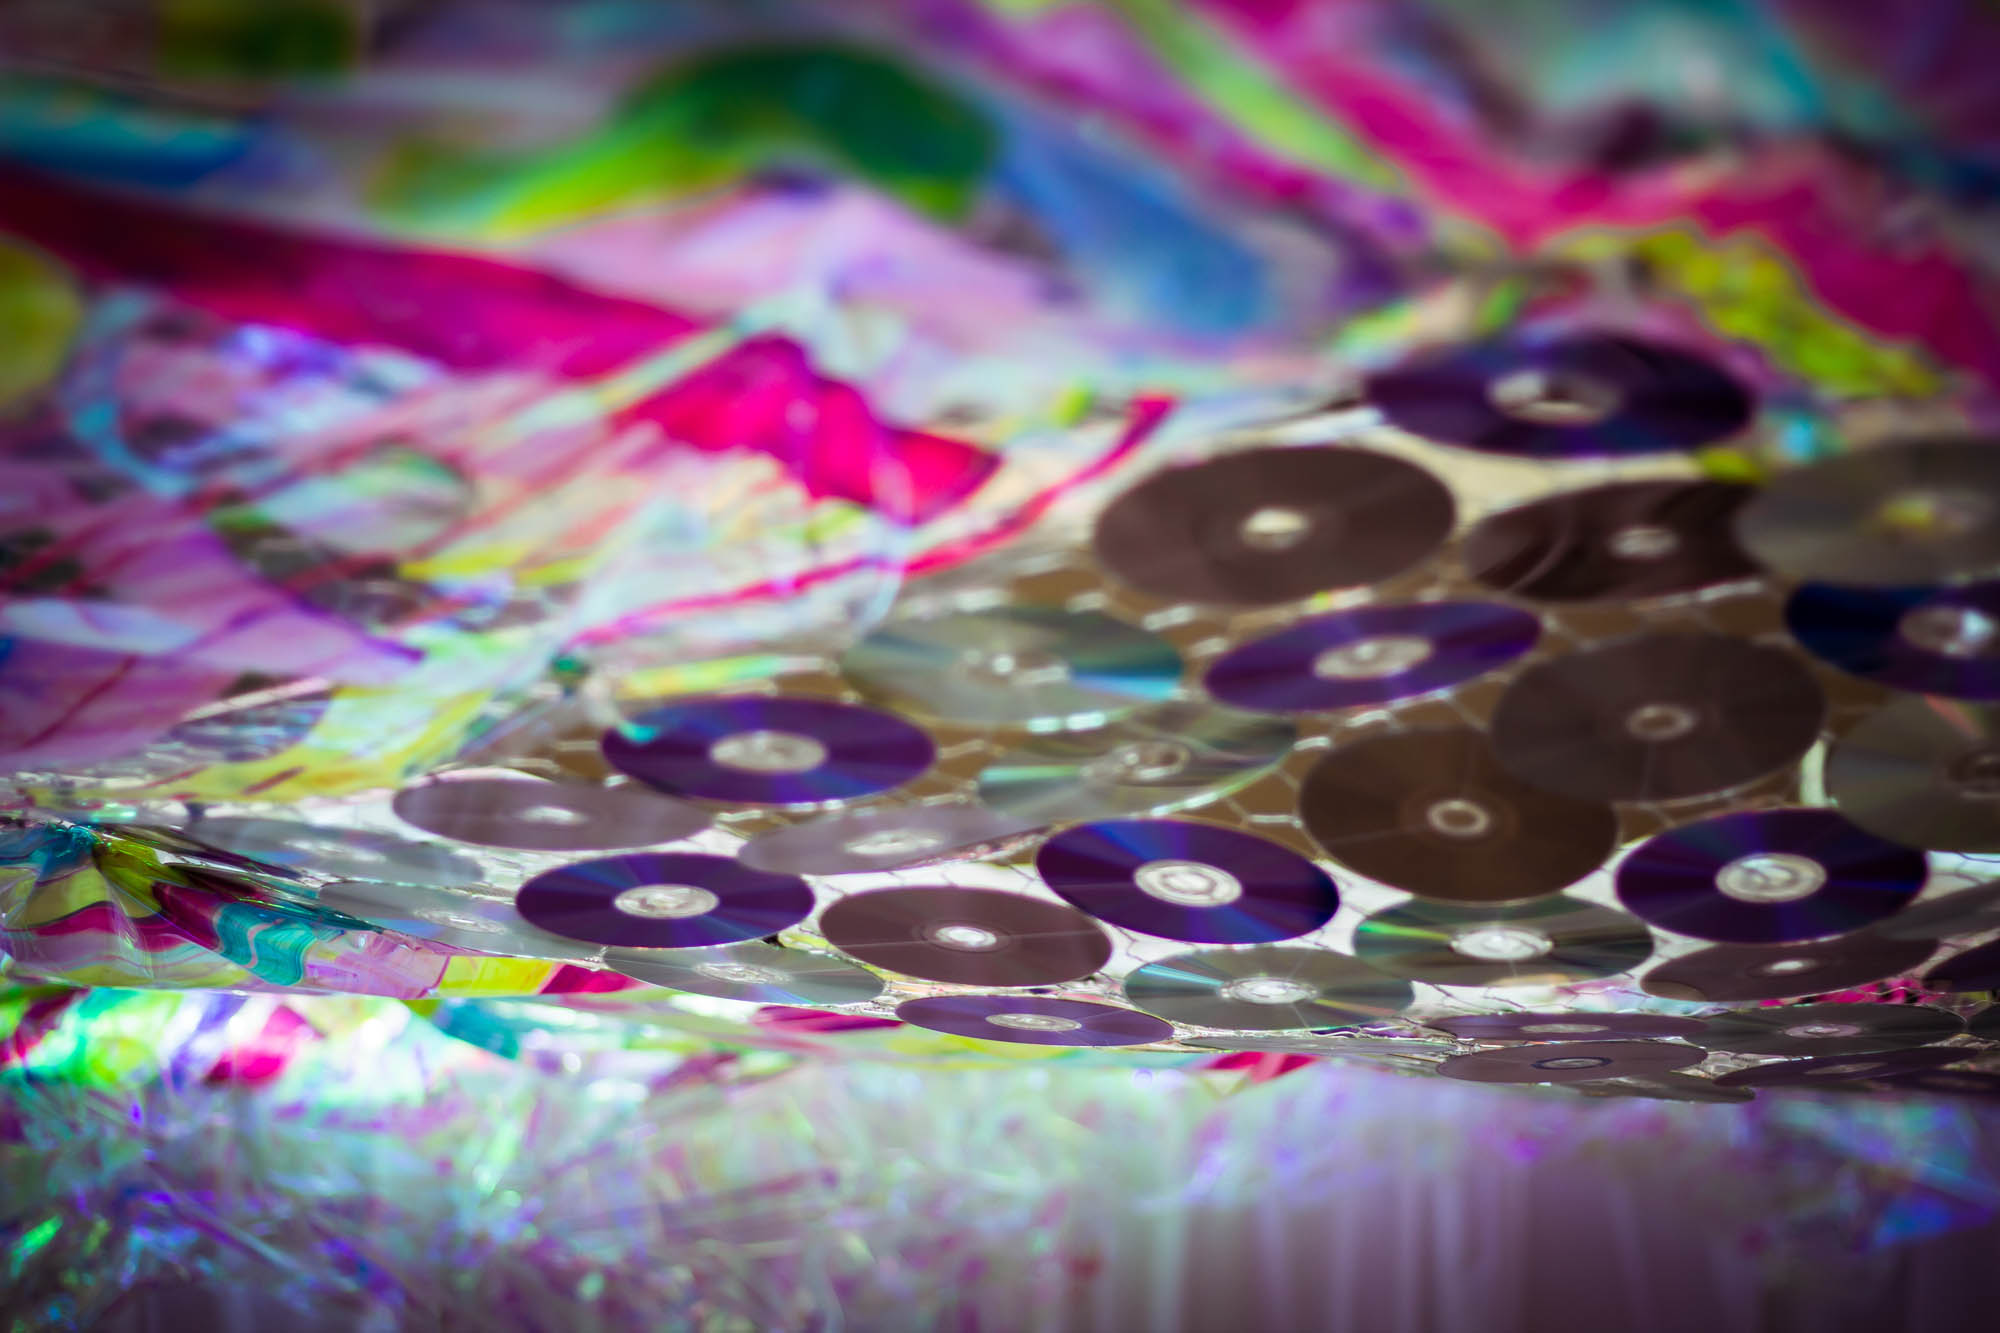 The artist layered cellophane surrounding a sheet of CD’s in the center. Creating a never ending portal of colorful kaleidoscope rainbows.